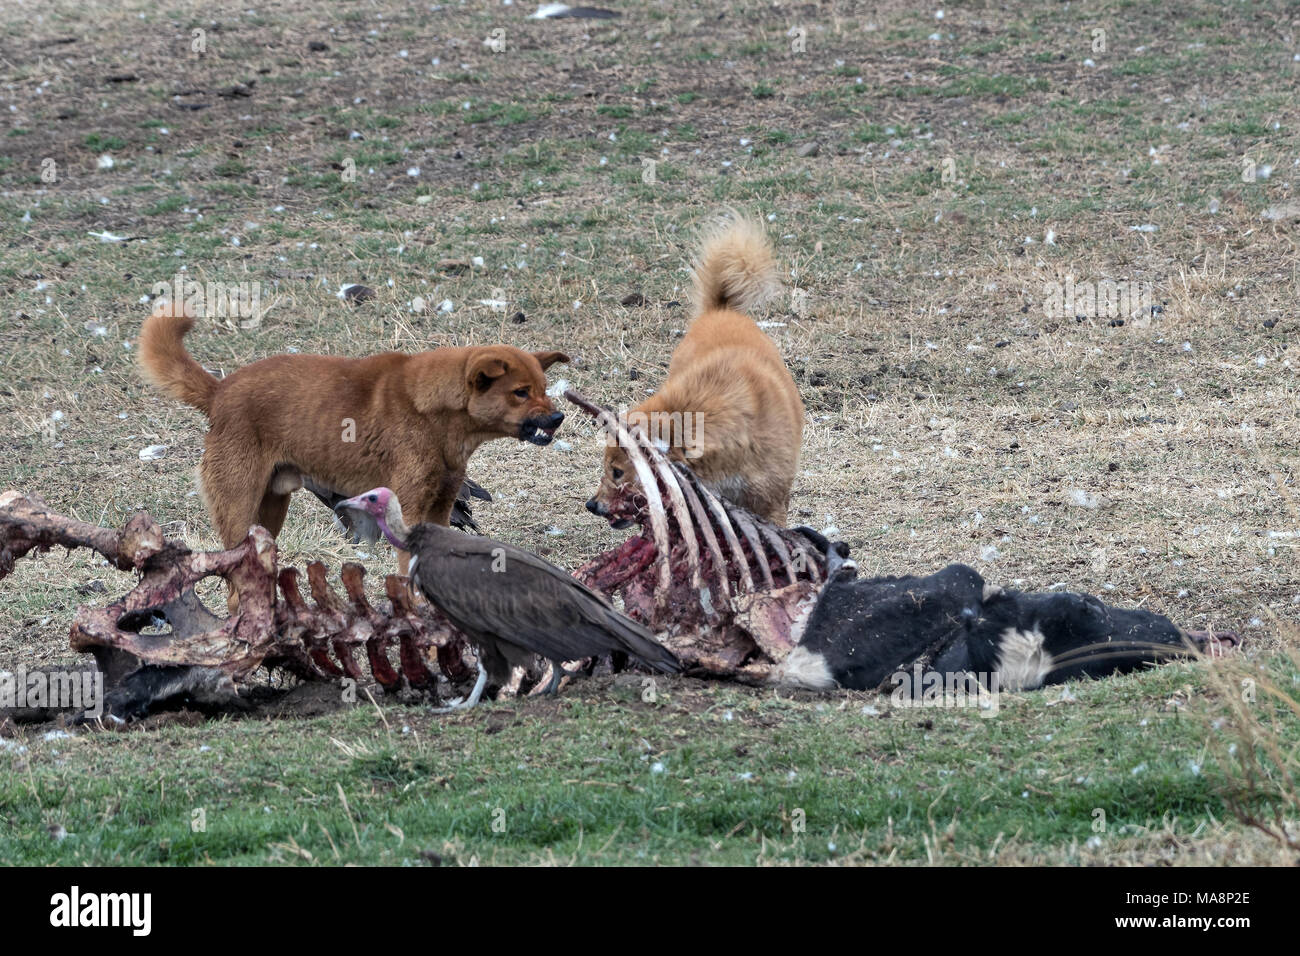 Stray dogs fighting for food, Ethiopia Stock Photo